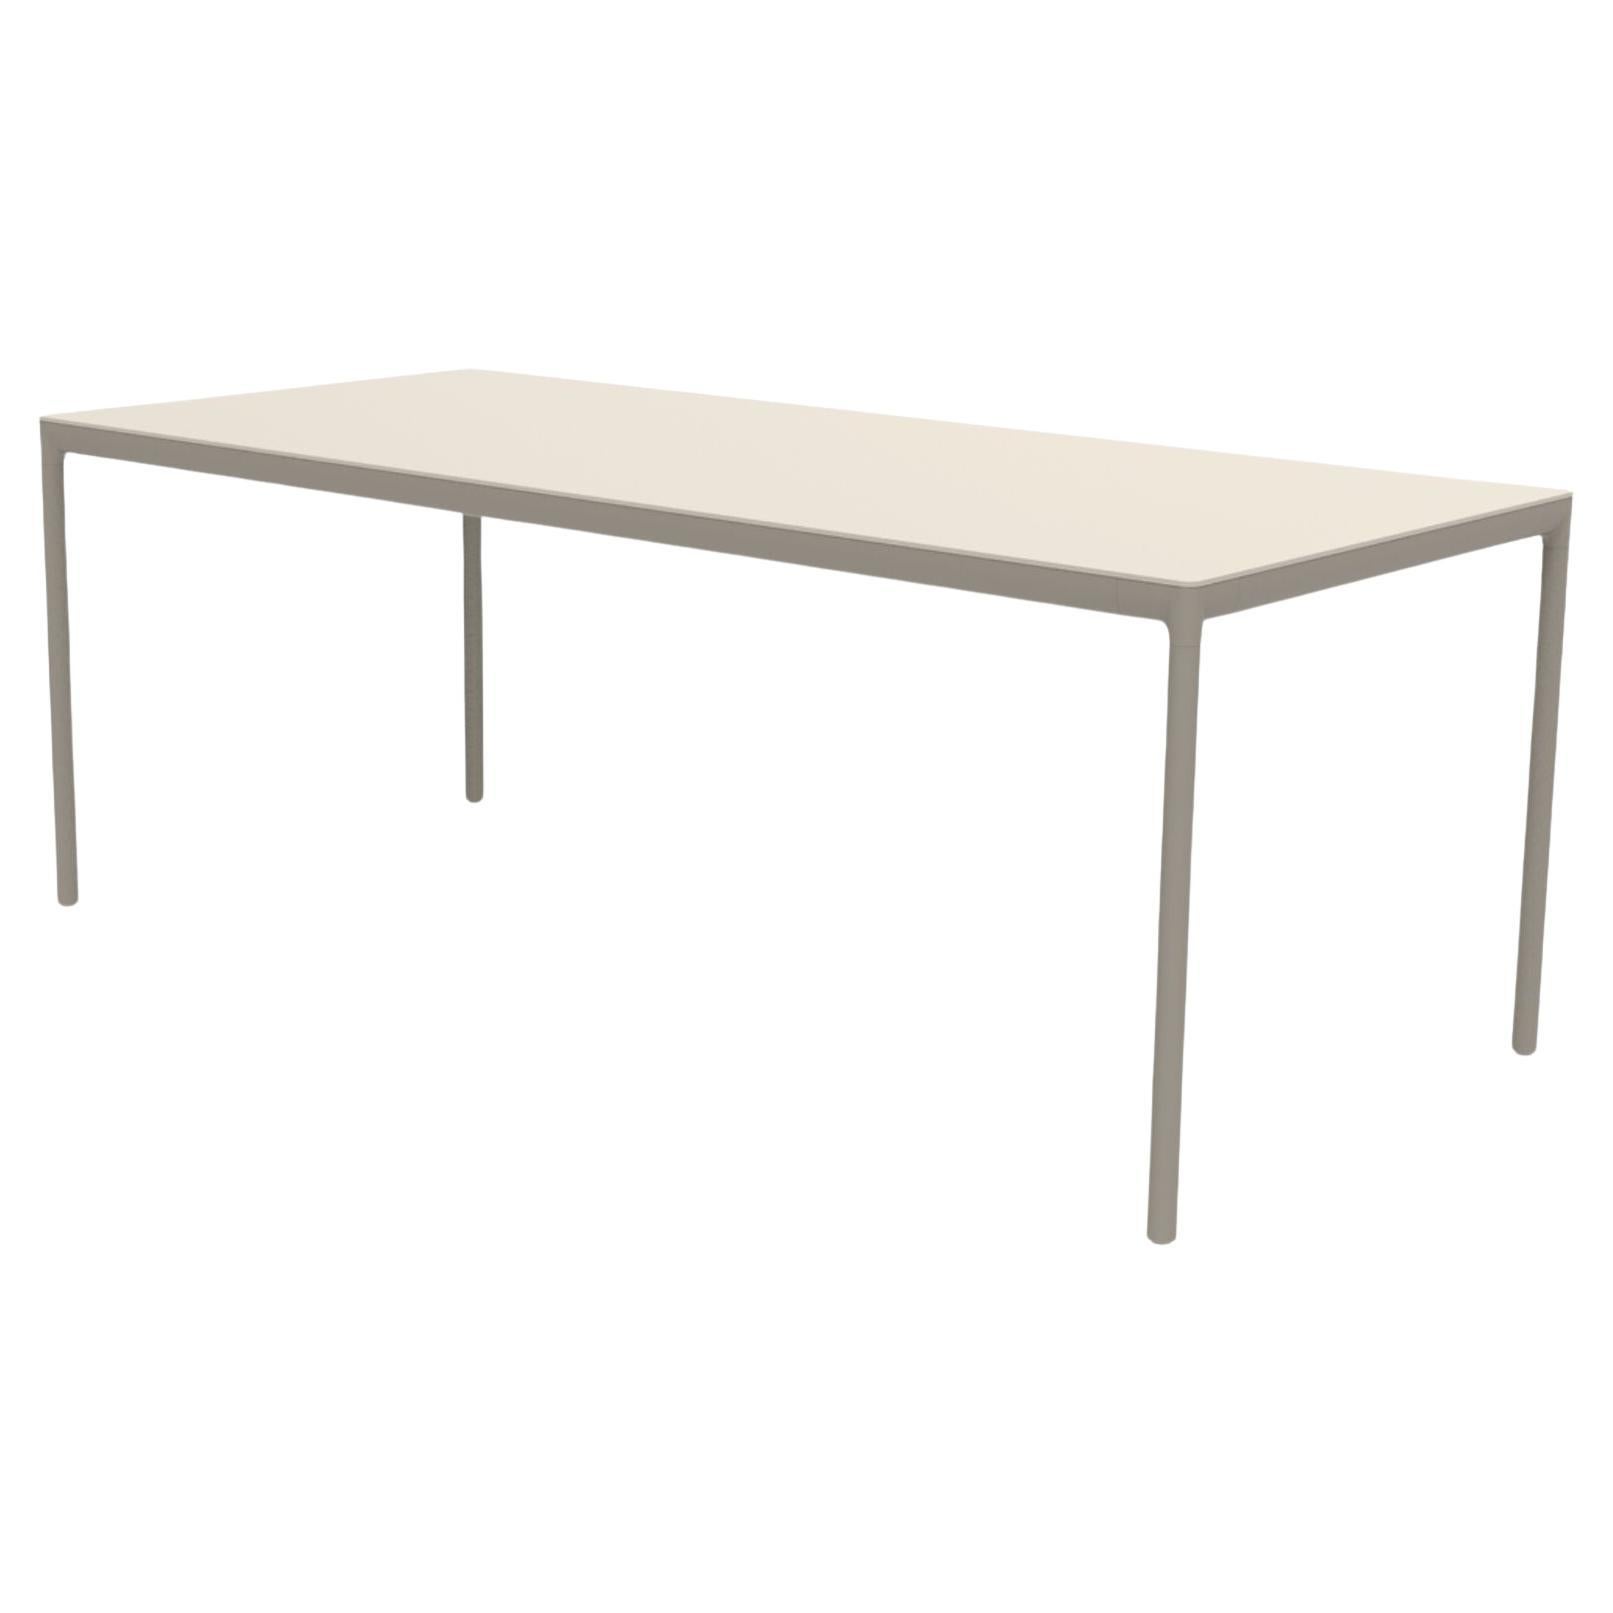 Ribbons Cream 200 Coffee Table by Mowee For Sale